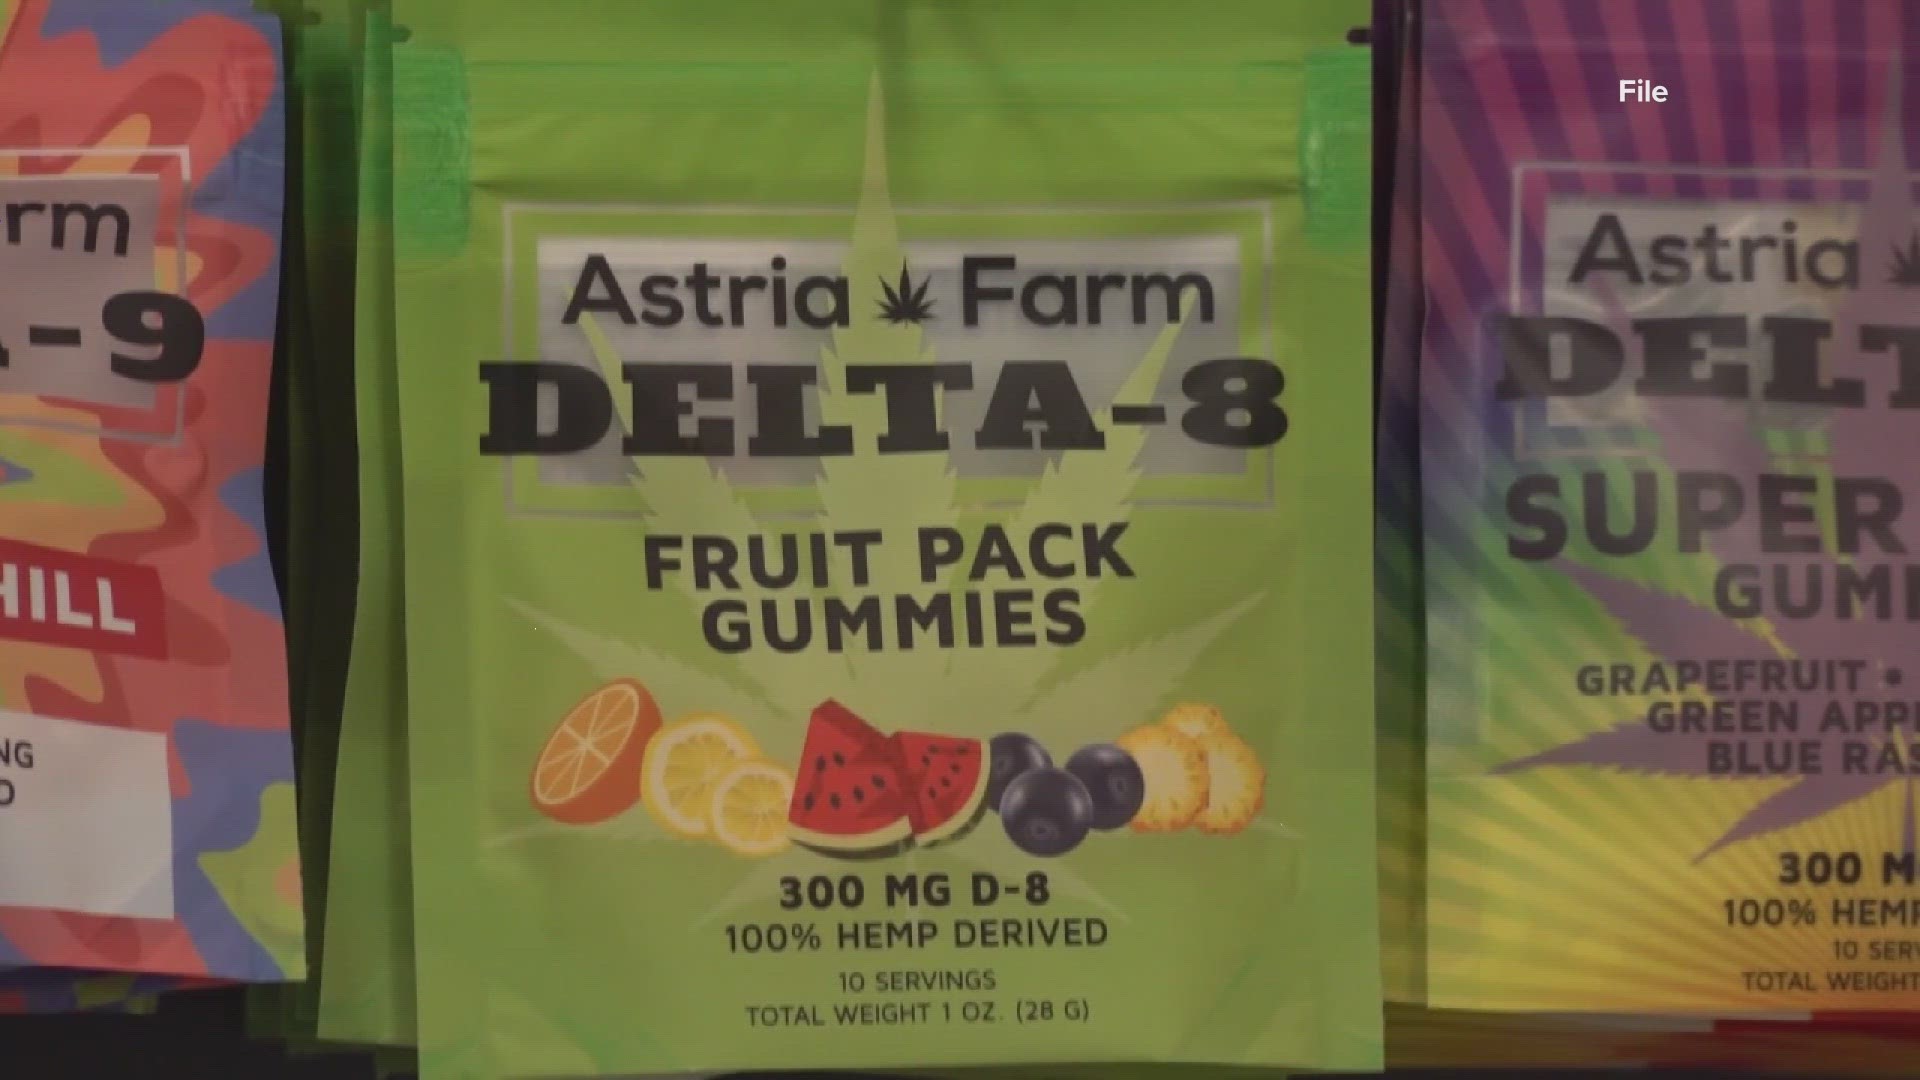 A judge has blocked an Arkansas law that bans the production and sales of products that contain Delta 8, Delta 9, and Delta 10 THC.